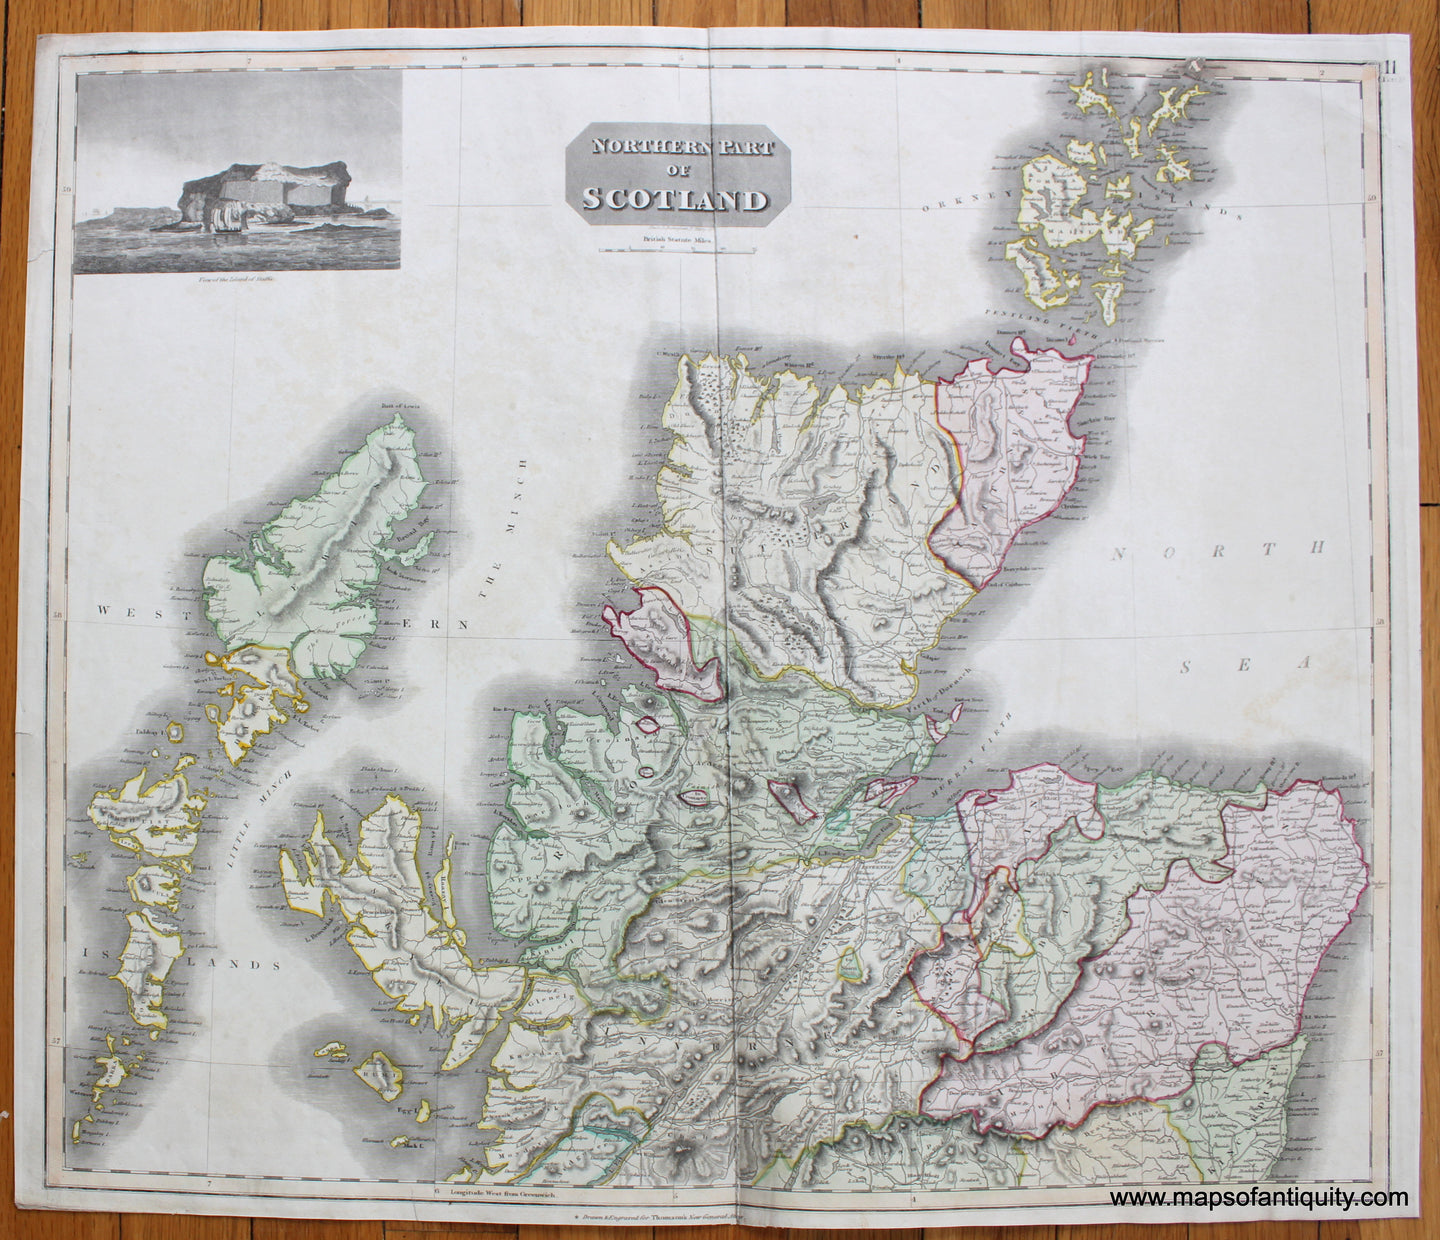 Antique-Map-Northern-Part-of-Scotland-Thomson-1815-1810s-1800s-Early-19th-Century-Maps-of-Antiquity